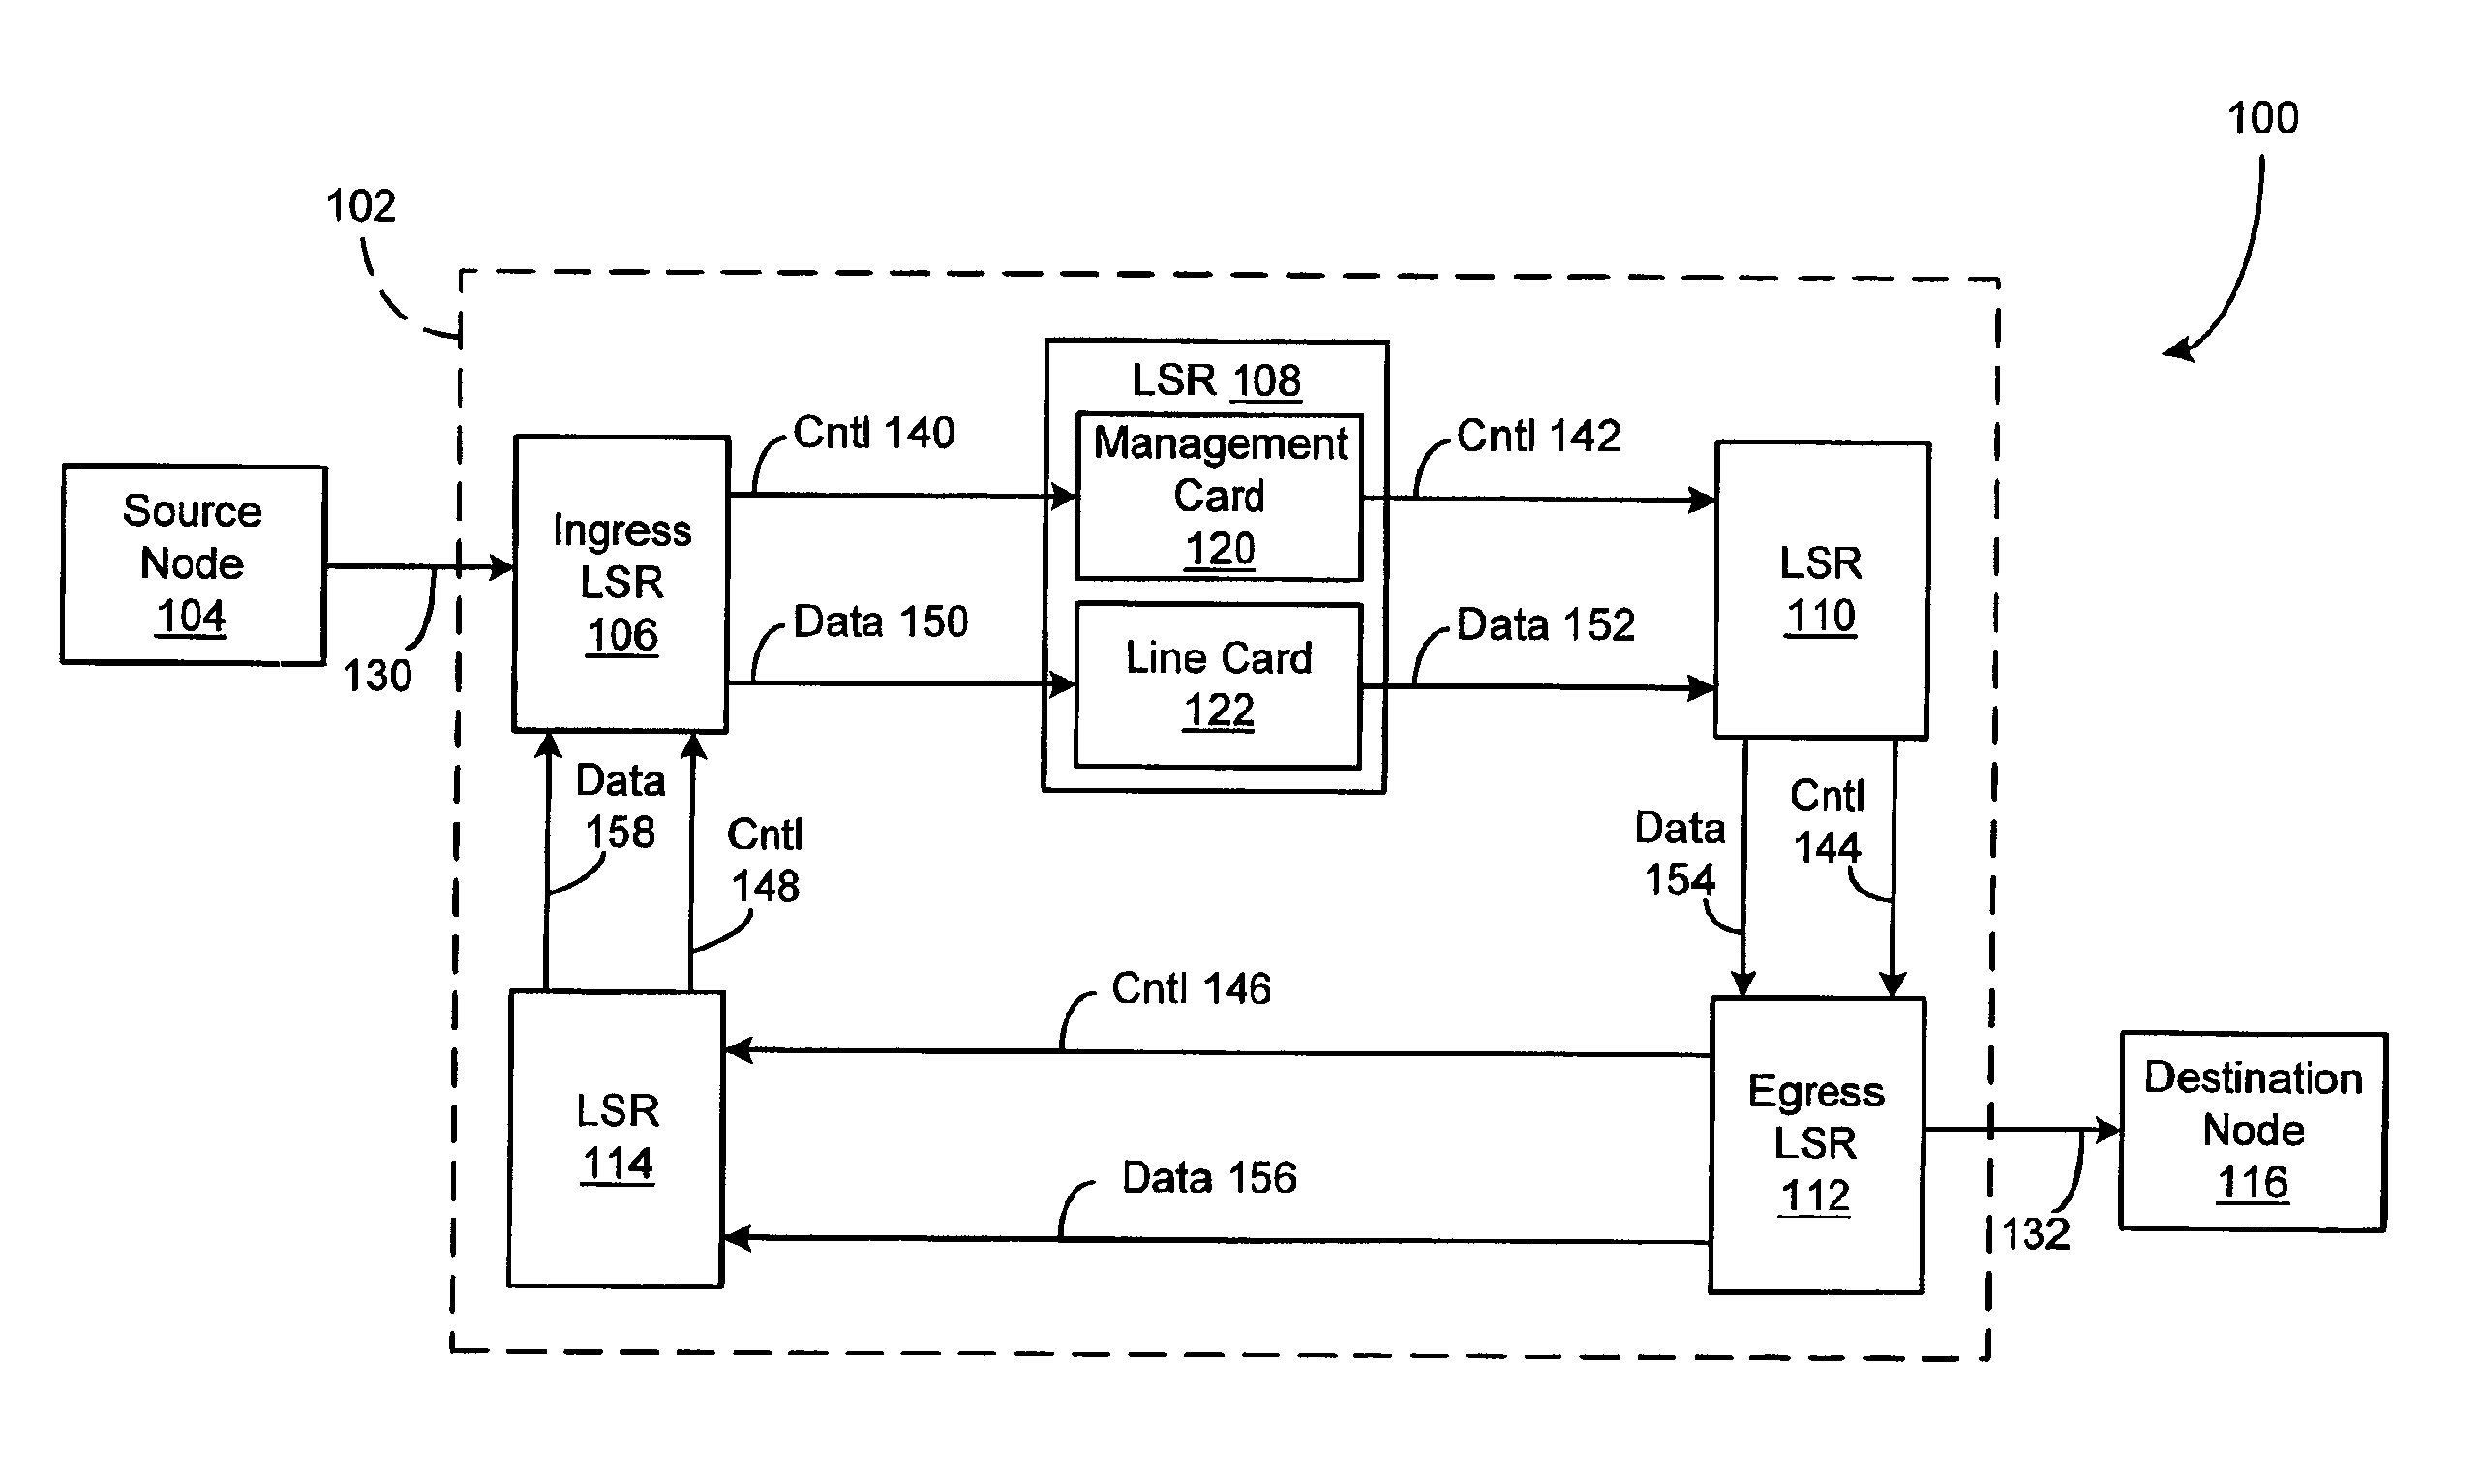 Circuit reestablishment and tear down in a highly available communications system